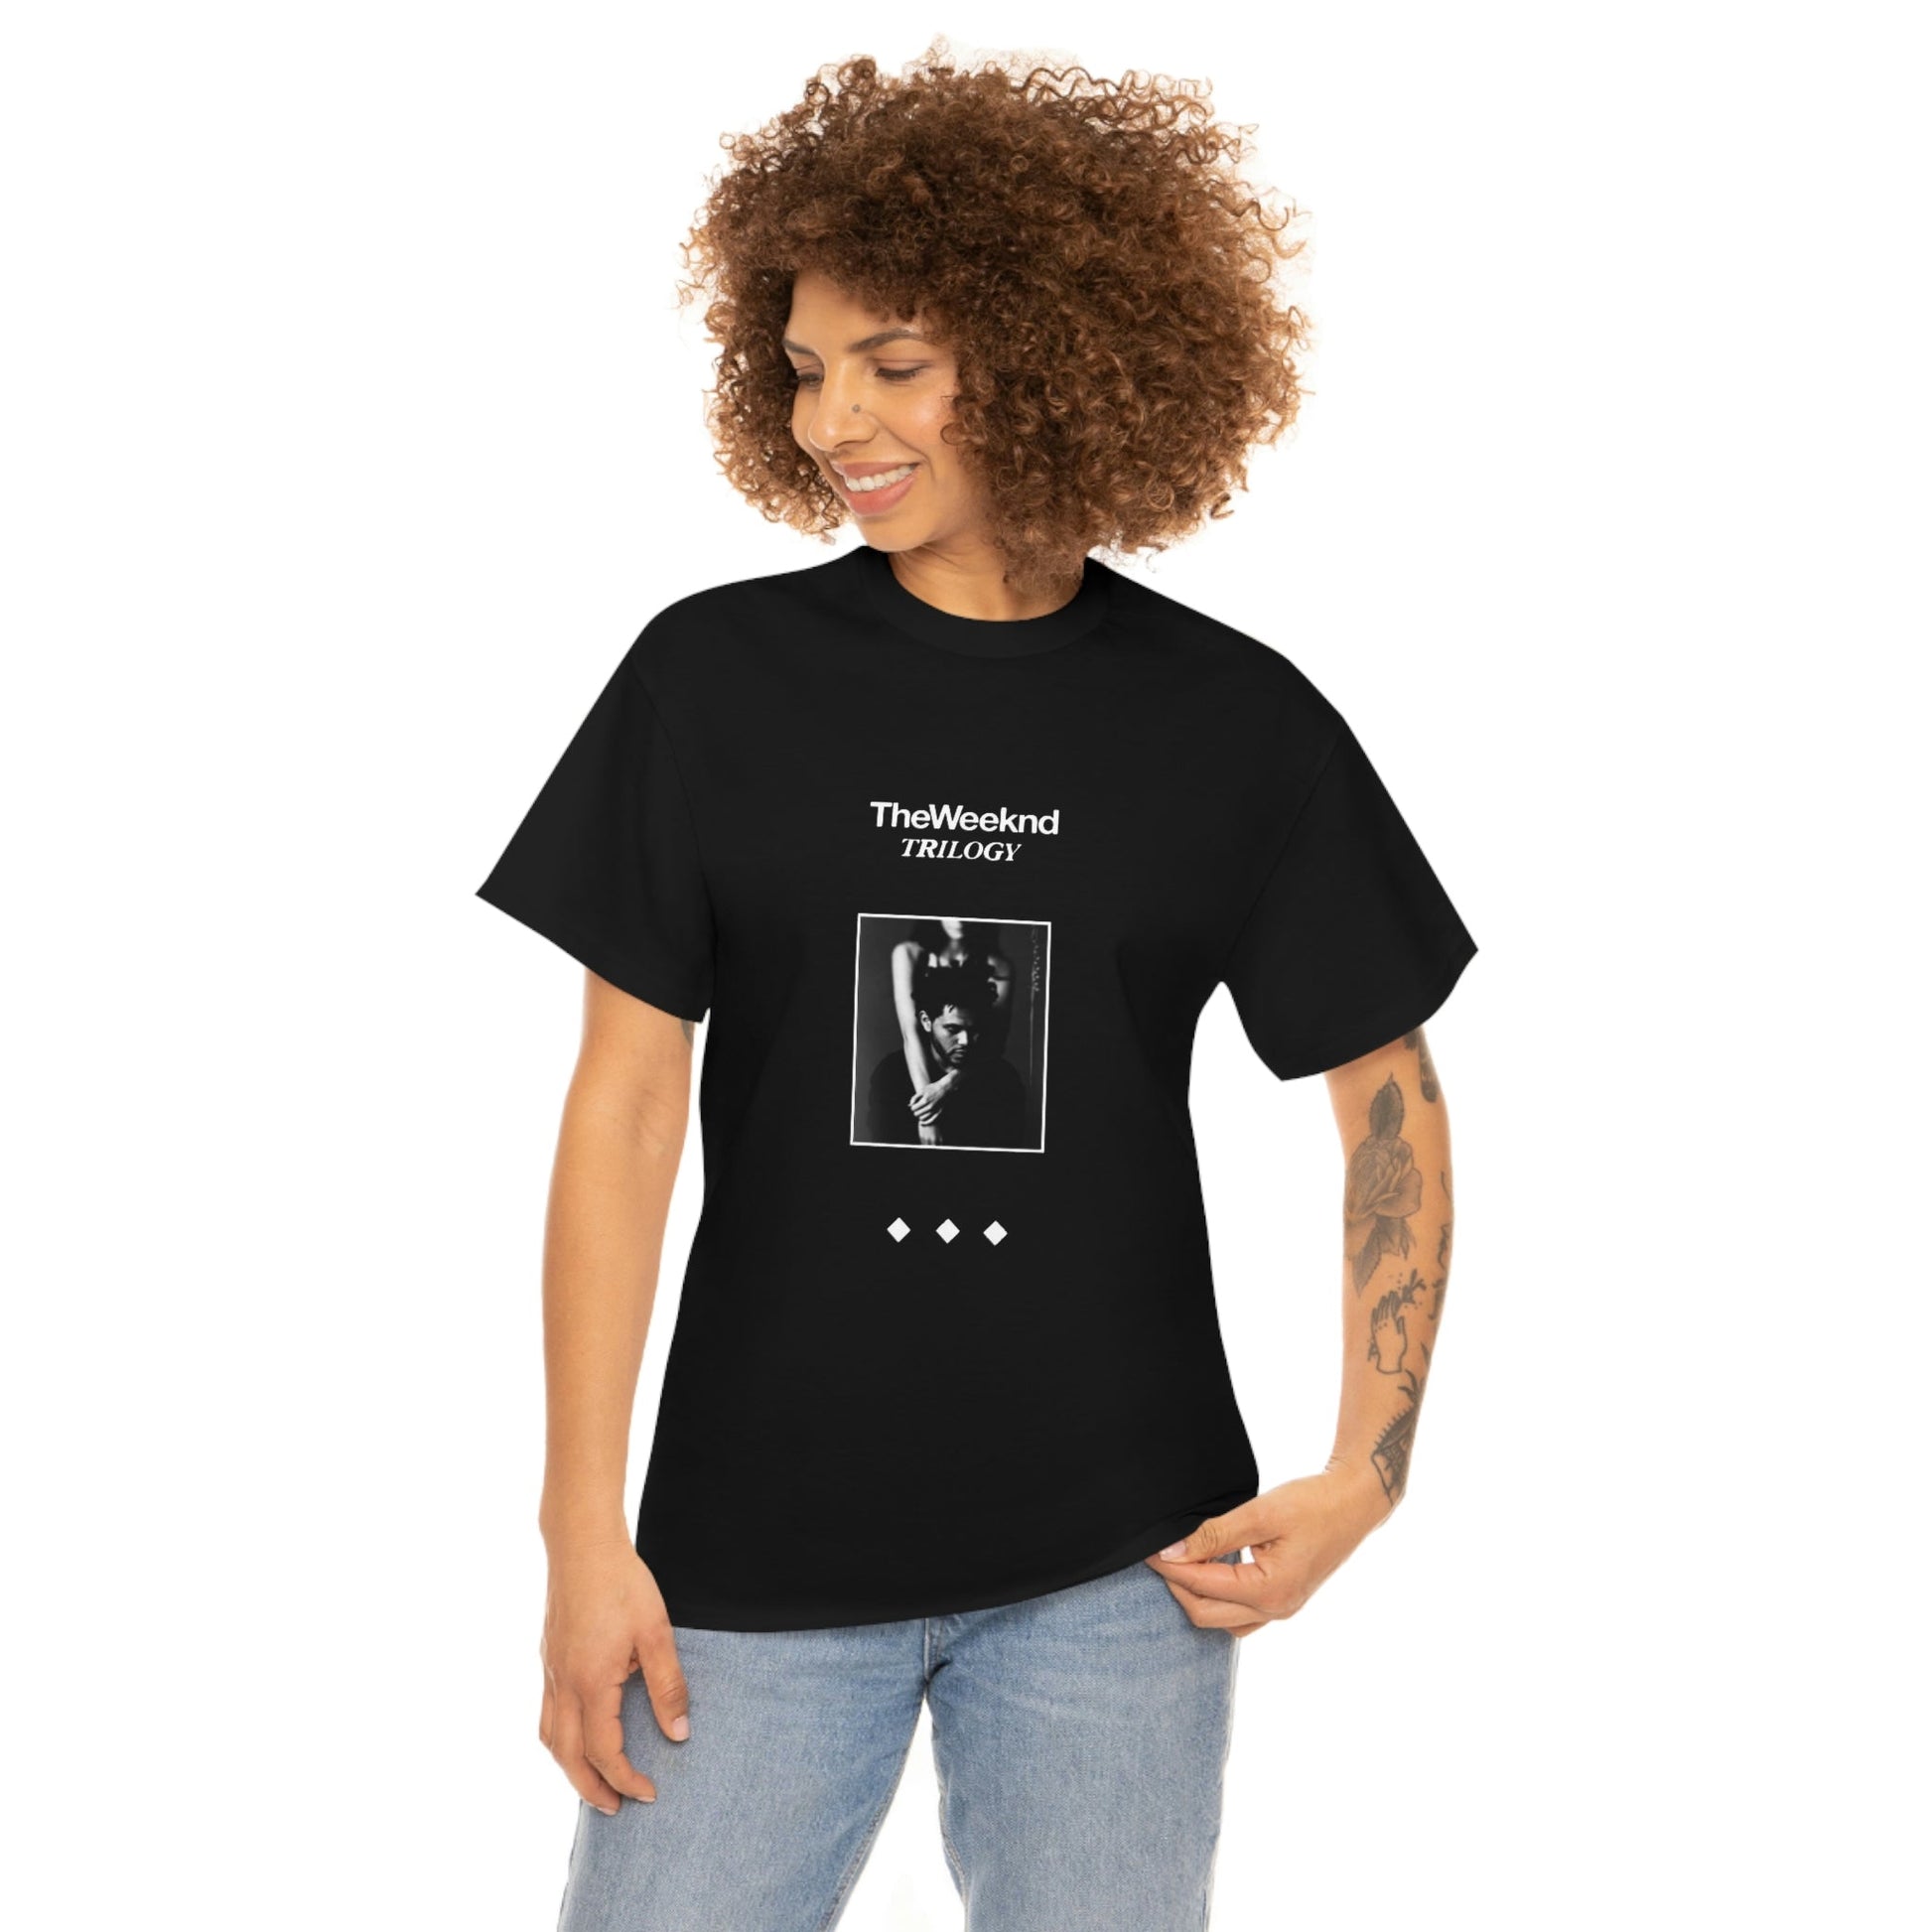 The Weeknd Trilogy Limited T-Shirt - RetroTeeShop